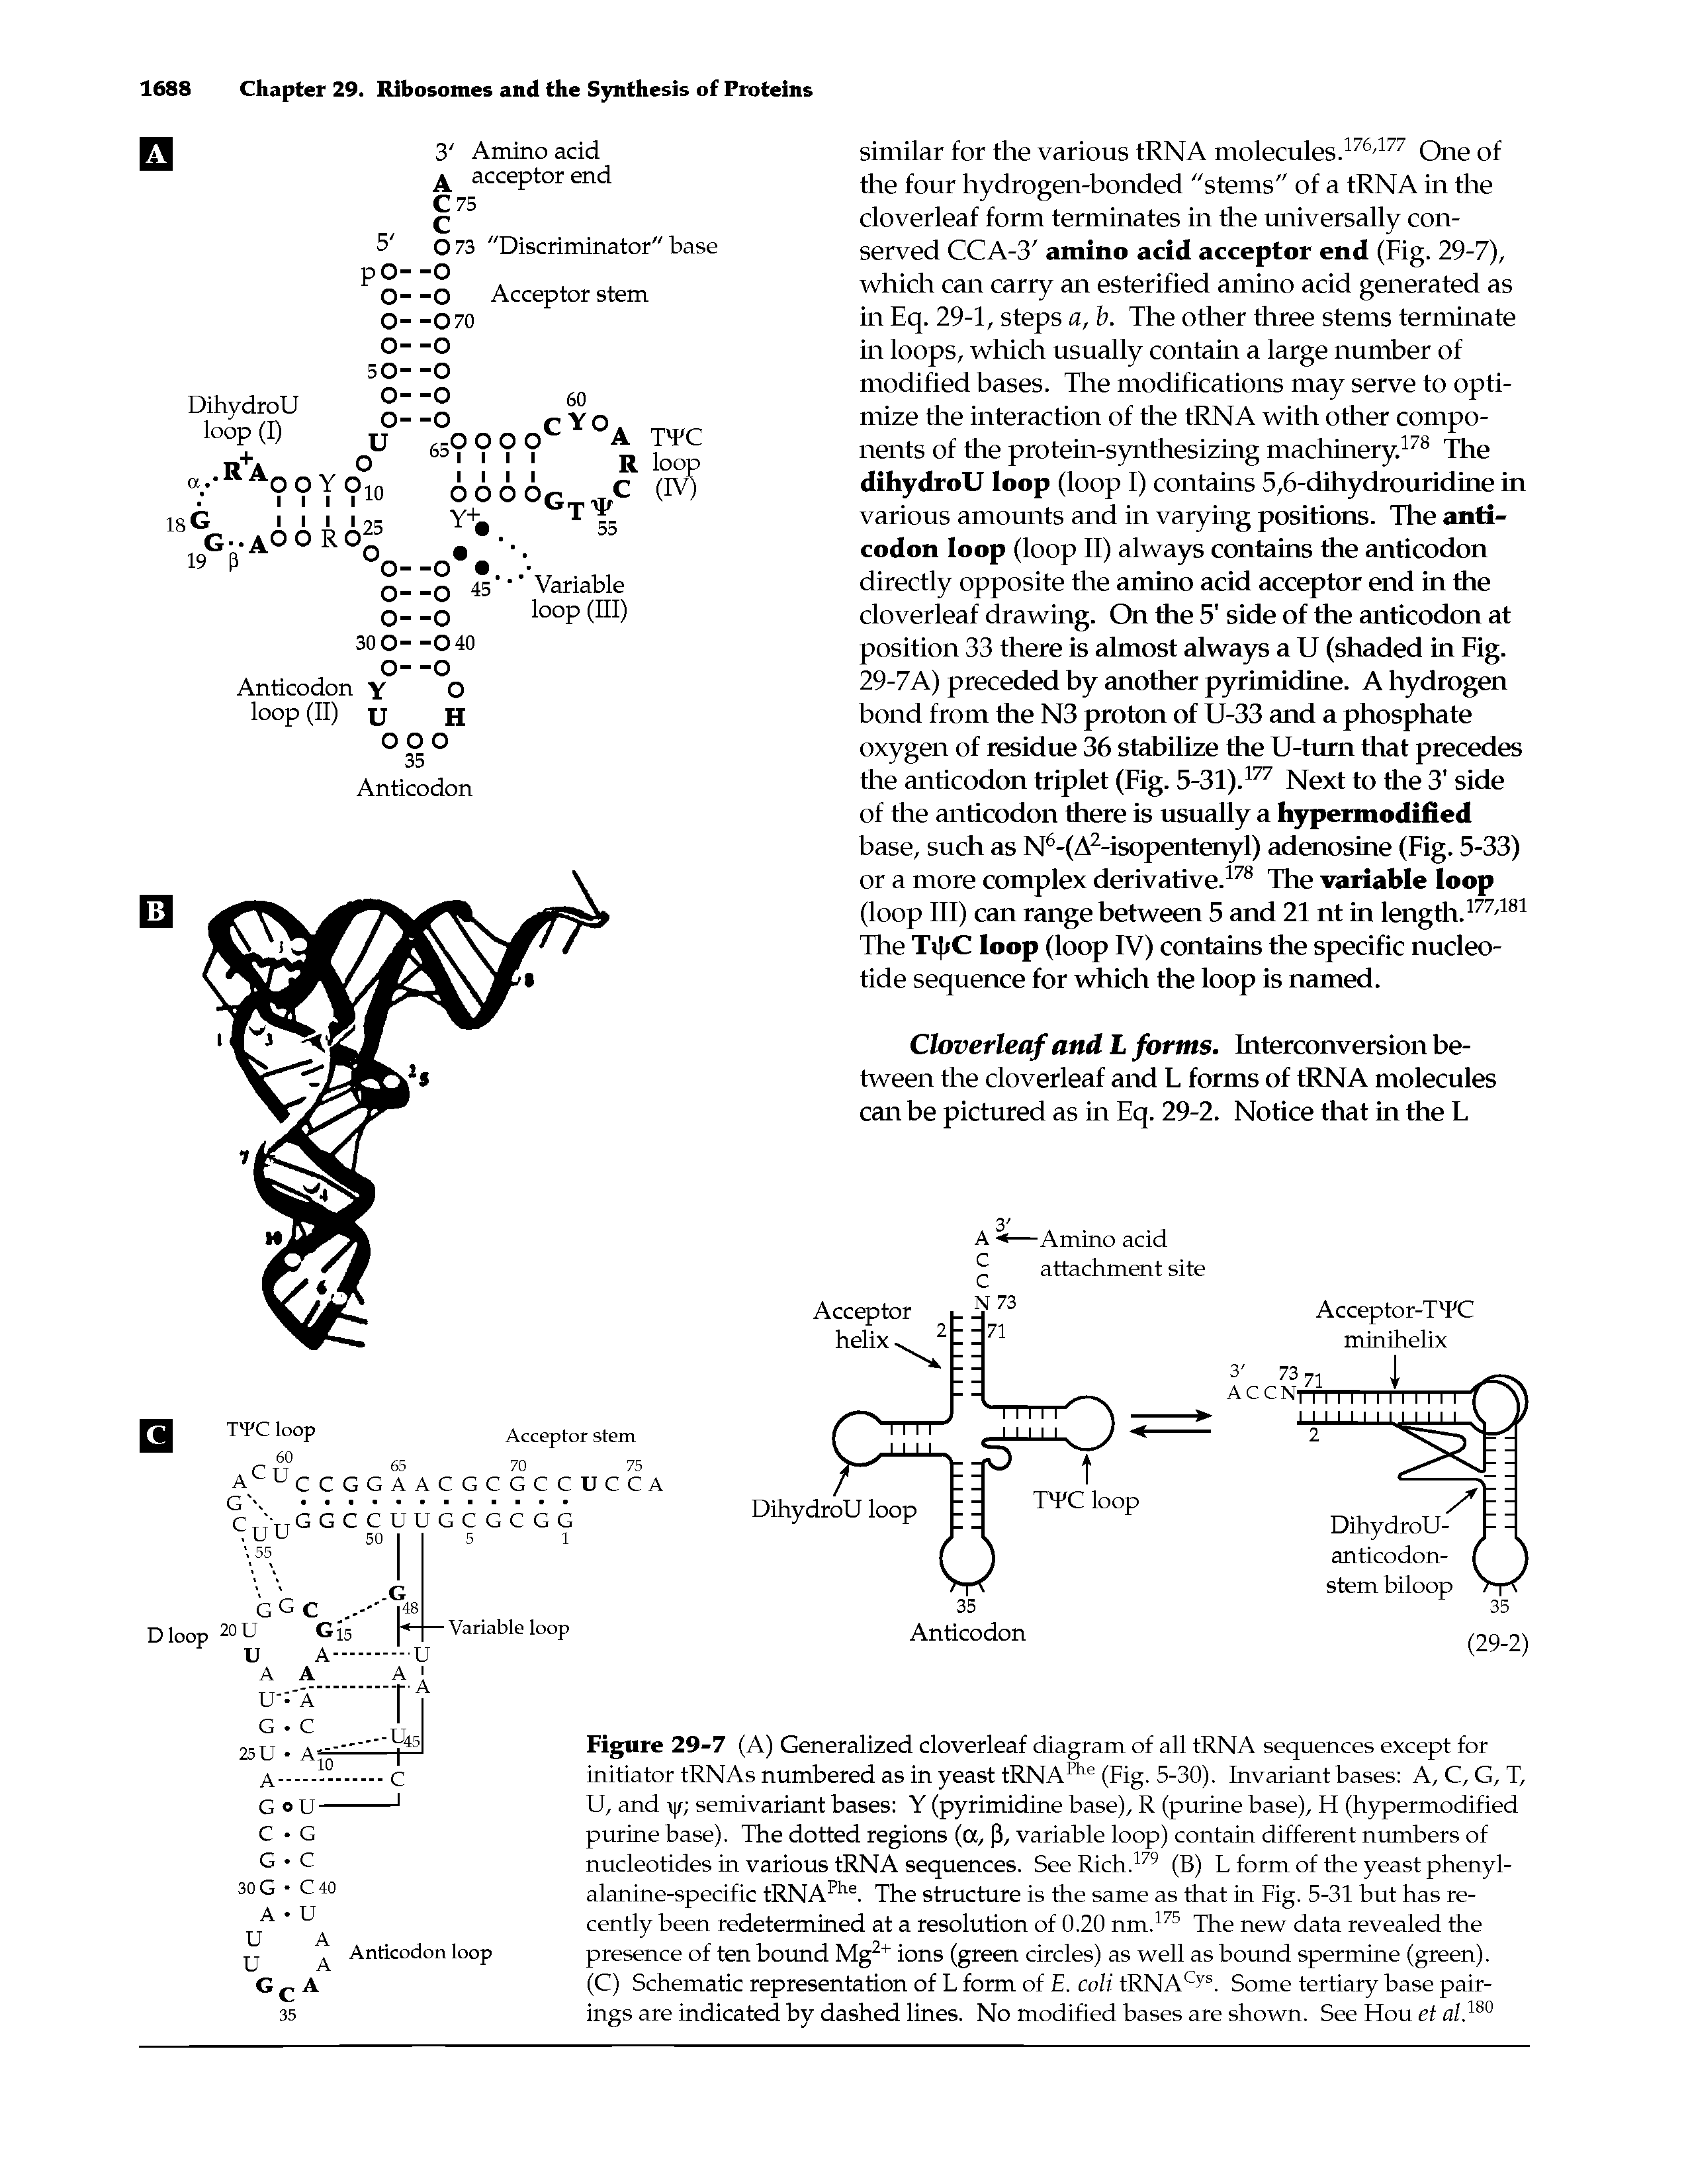 Figure 29-7 (A) Generalized cloverleaf diagram of all tRNA sequences except for initiator tRNAs numbered as in yeast tRNAae (Fig. 5-30). Invariant bases A, C, G, T, U, and semivariant bases Y (pyrimidine base), R (purine base), H (hypermodified purine base). The dotted regions (a, P, variable loop) contain different numbers of nucleotides in various tRNA sequences. See Rich.179 (B) L form of the yeast phenyl-alanine-specific tRNAphe. The structure is the same as that in Fig. 5-31 but has recently been redetermined at a resolution of 0.20 nm.175 The new data revealed the presence of ten bound Mg2+ ions (green circles) as well as bound spermine (green).